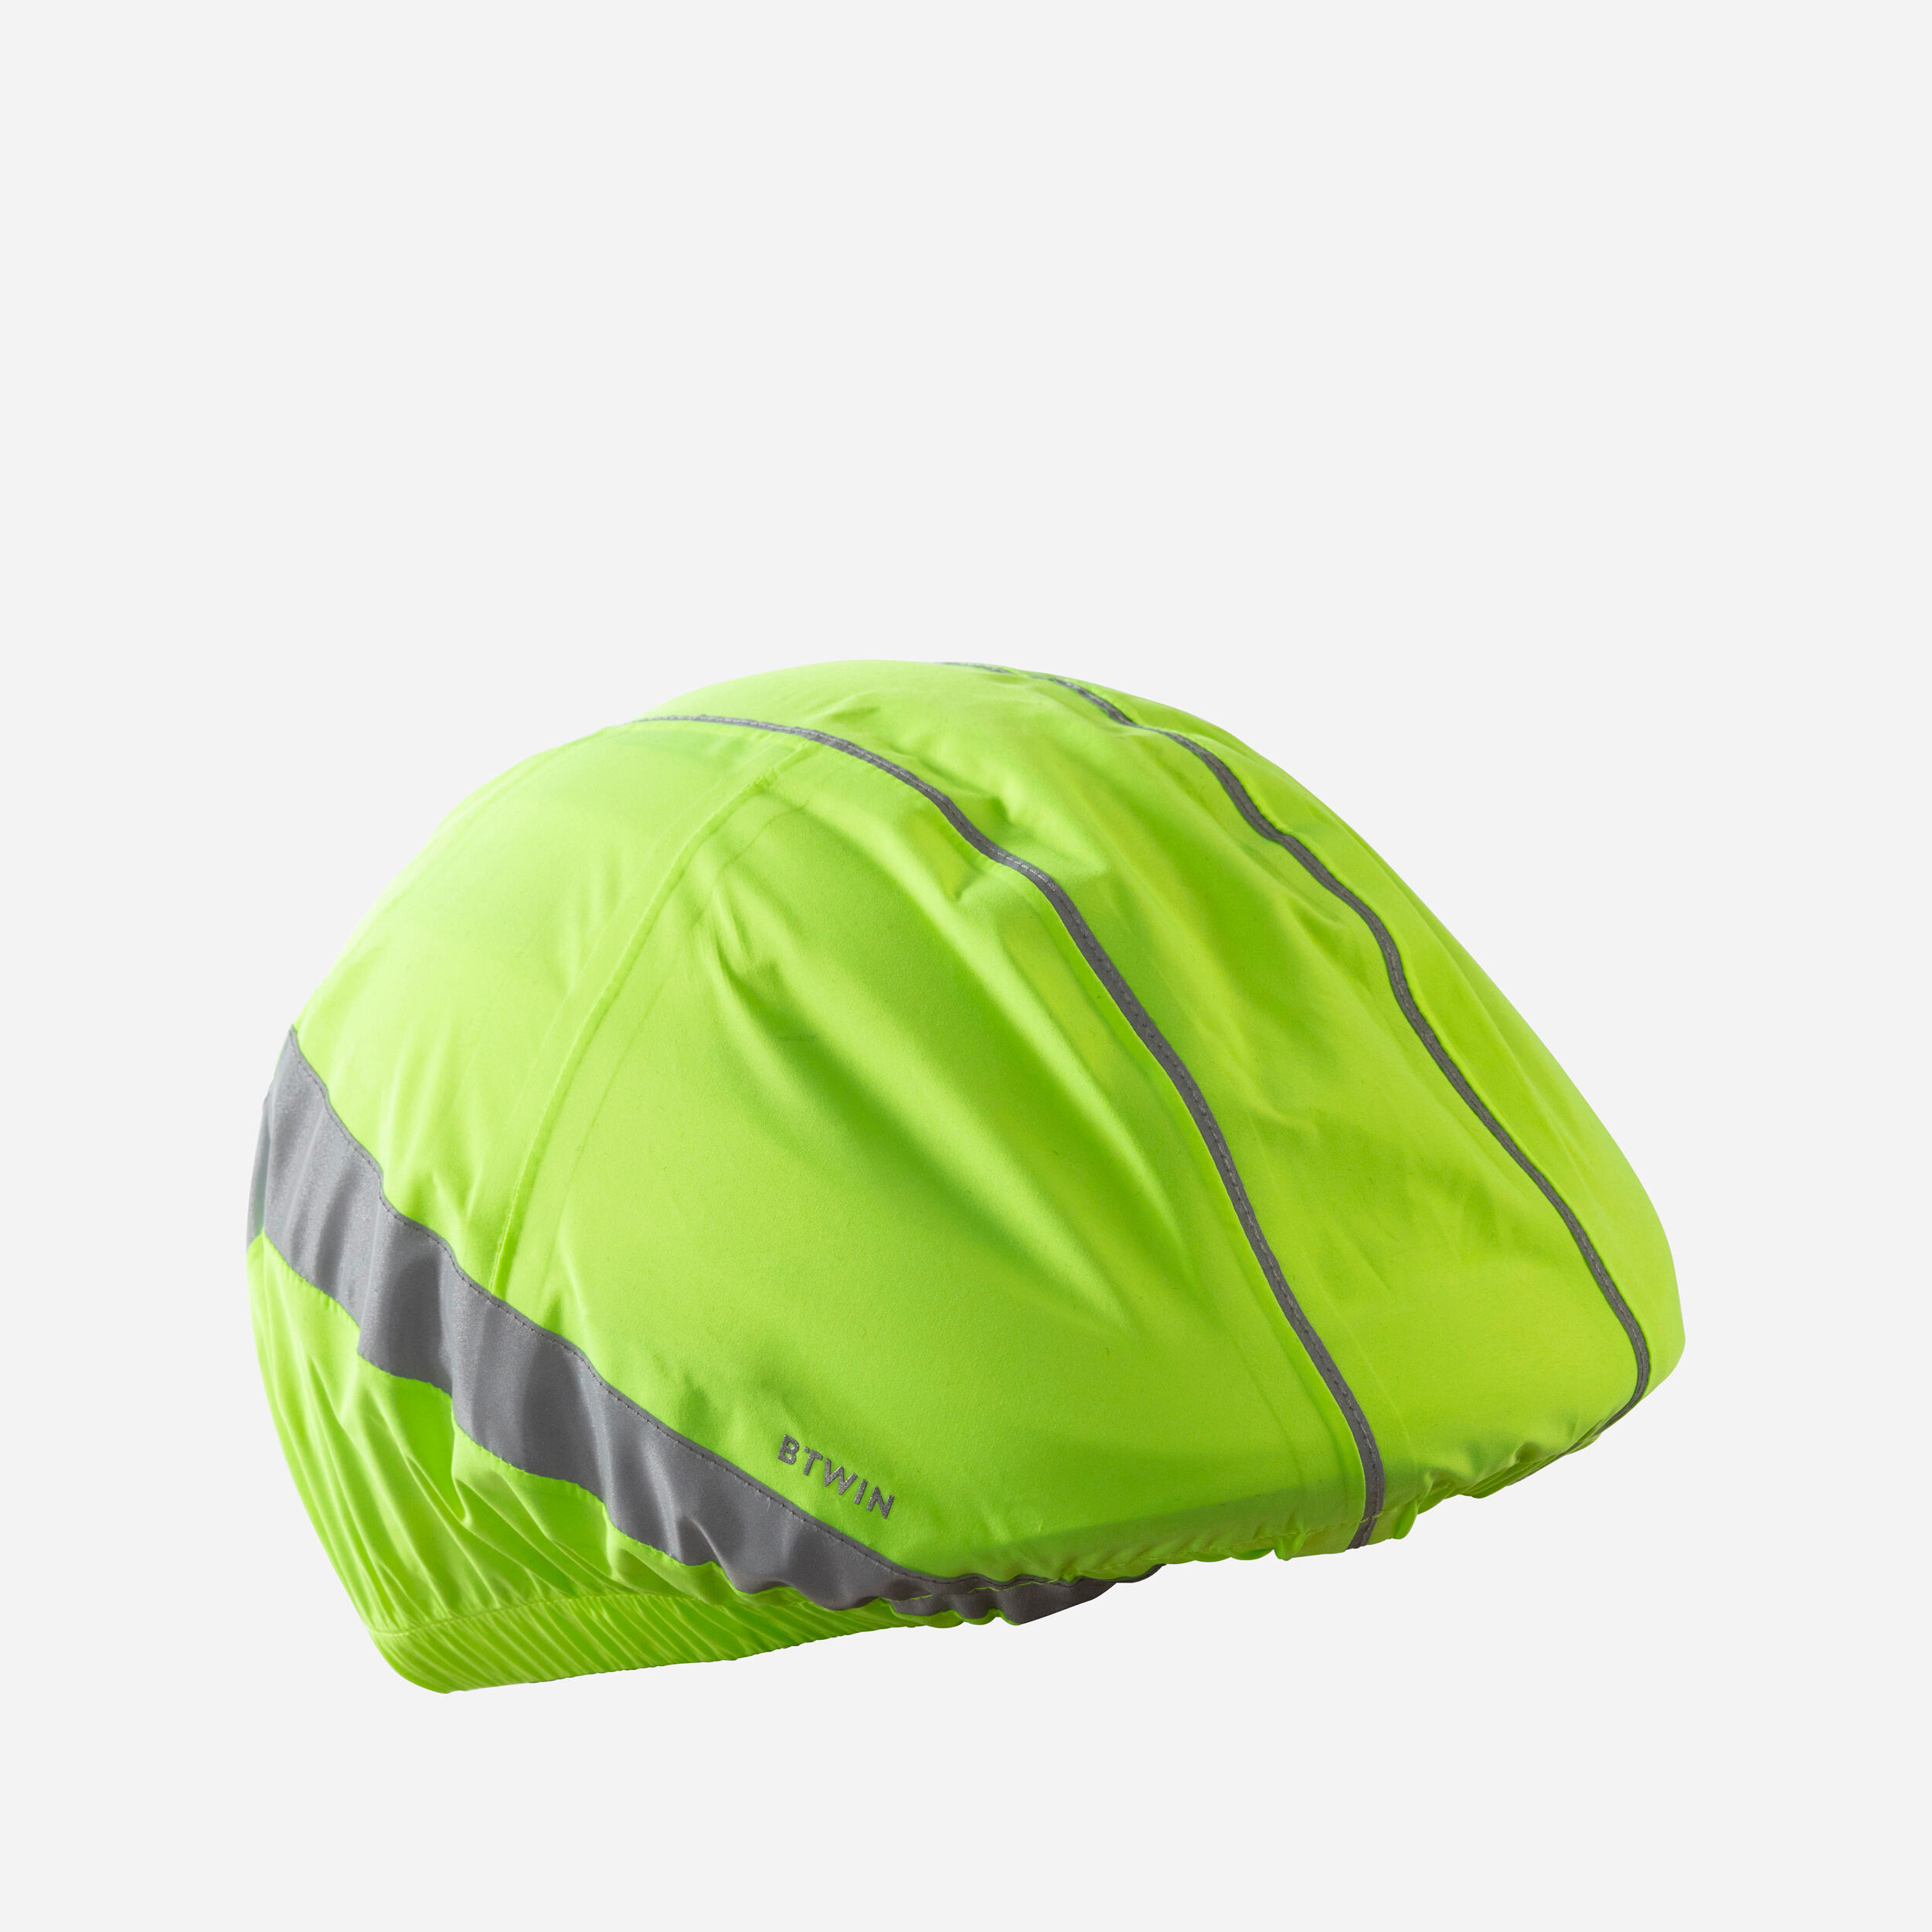 BTWIN Day/Night Visibility Waterproof Helmet Cover 960 - Neon Yellow